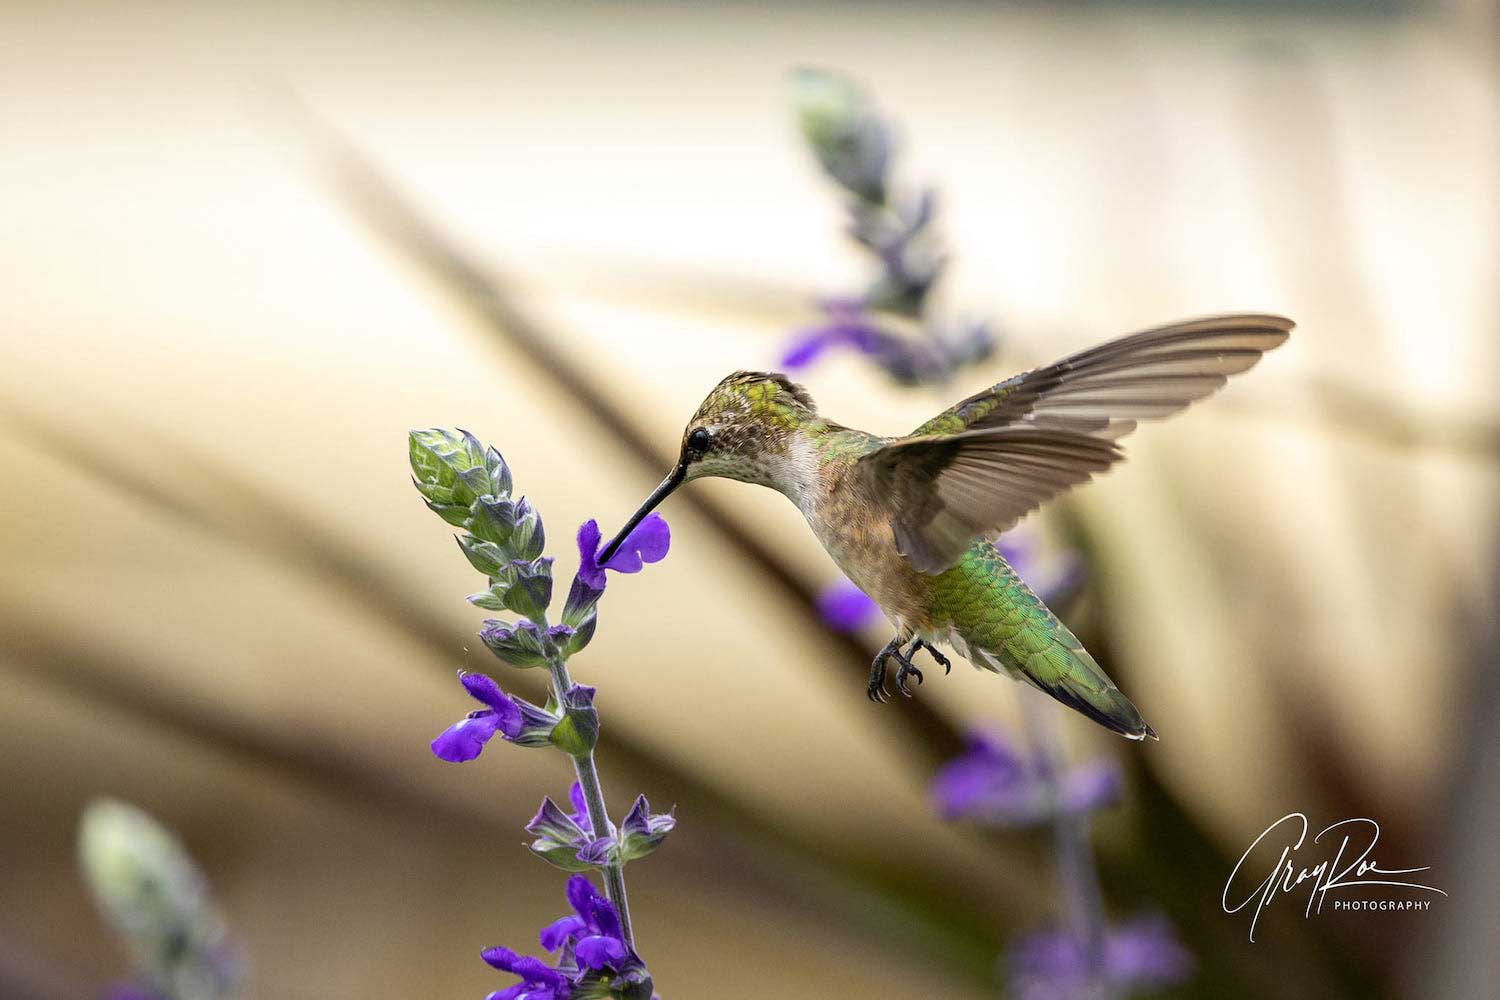 A ruby-throated hummingbird getting nectar from a purple flower.